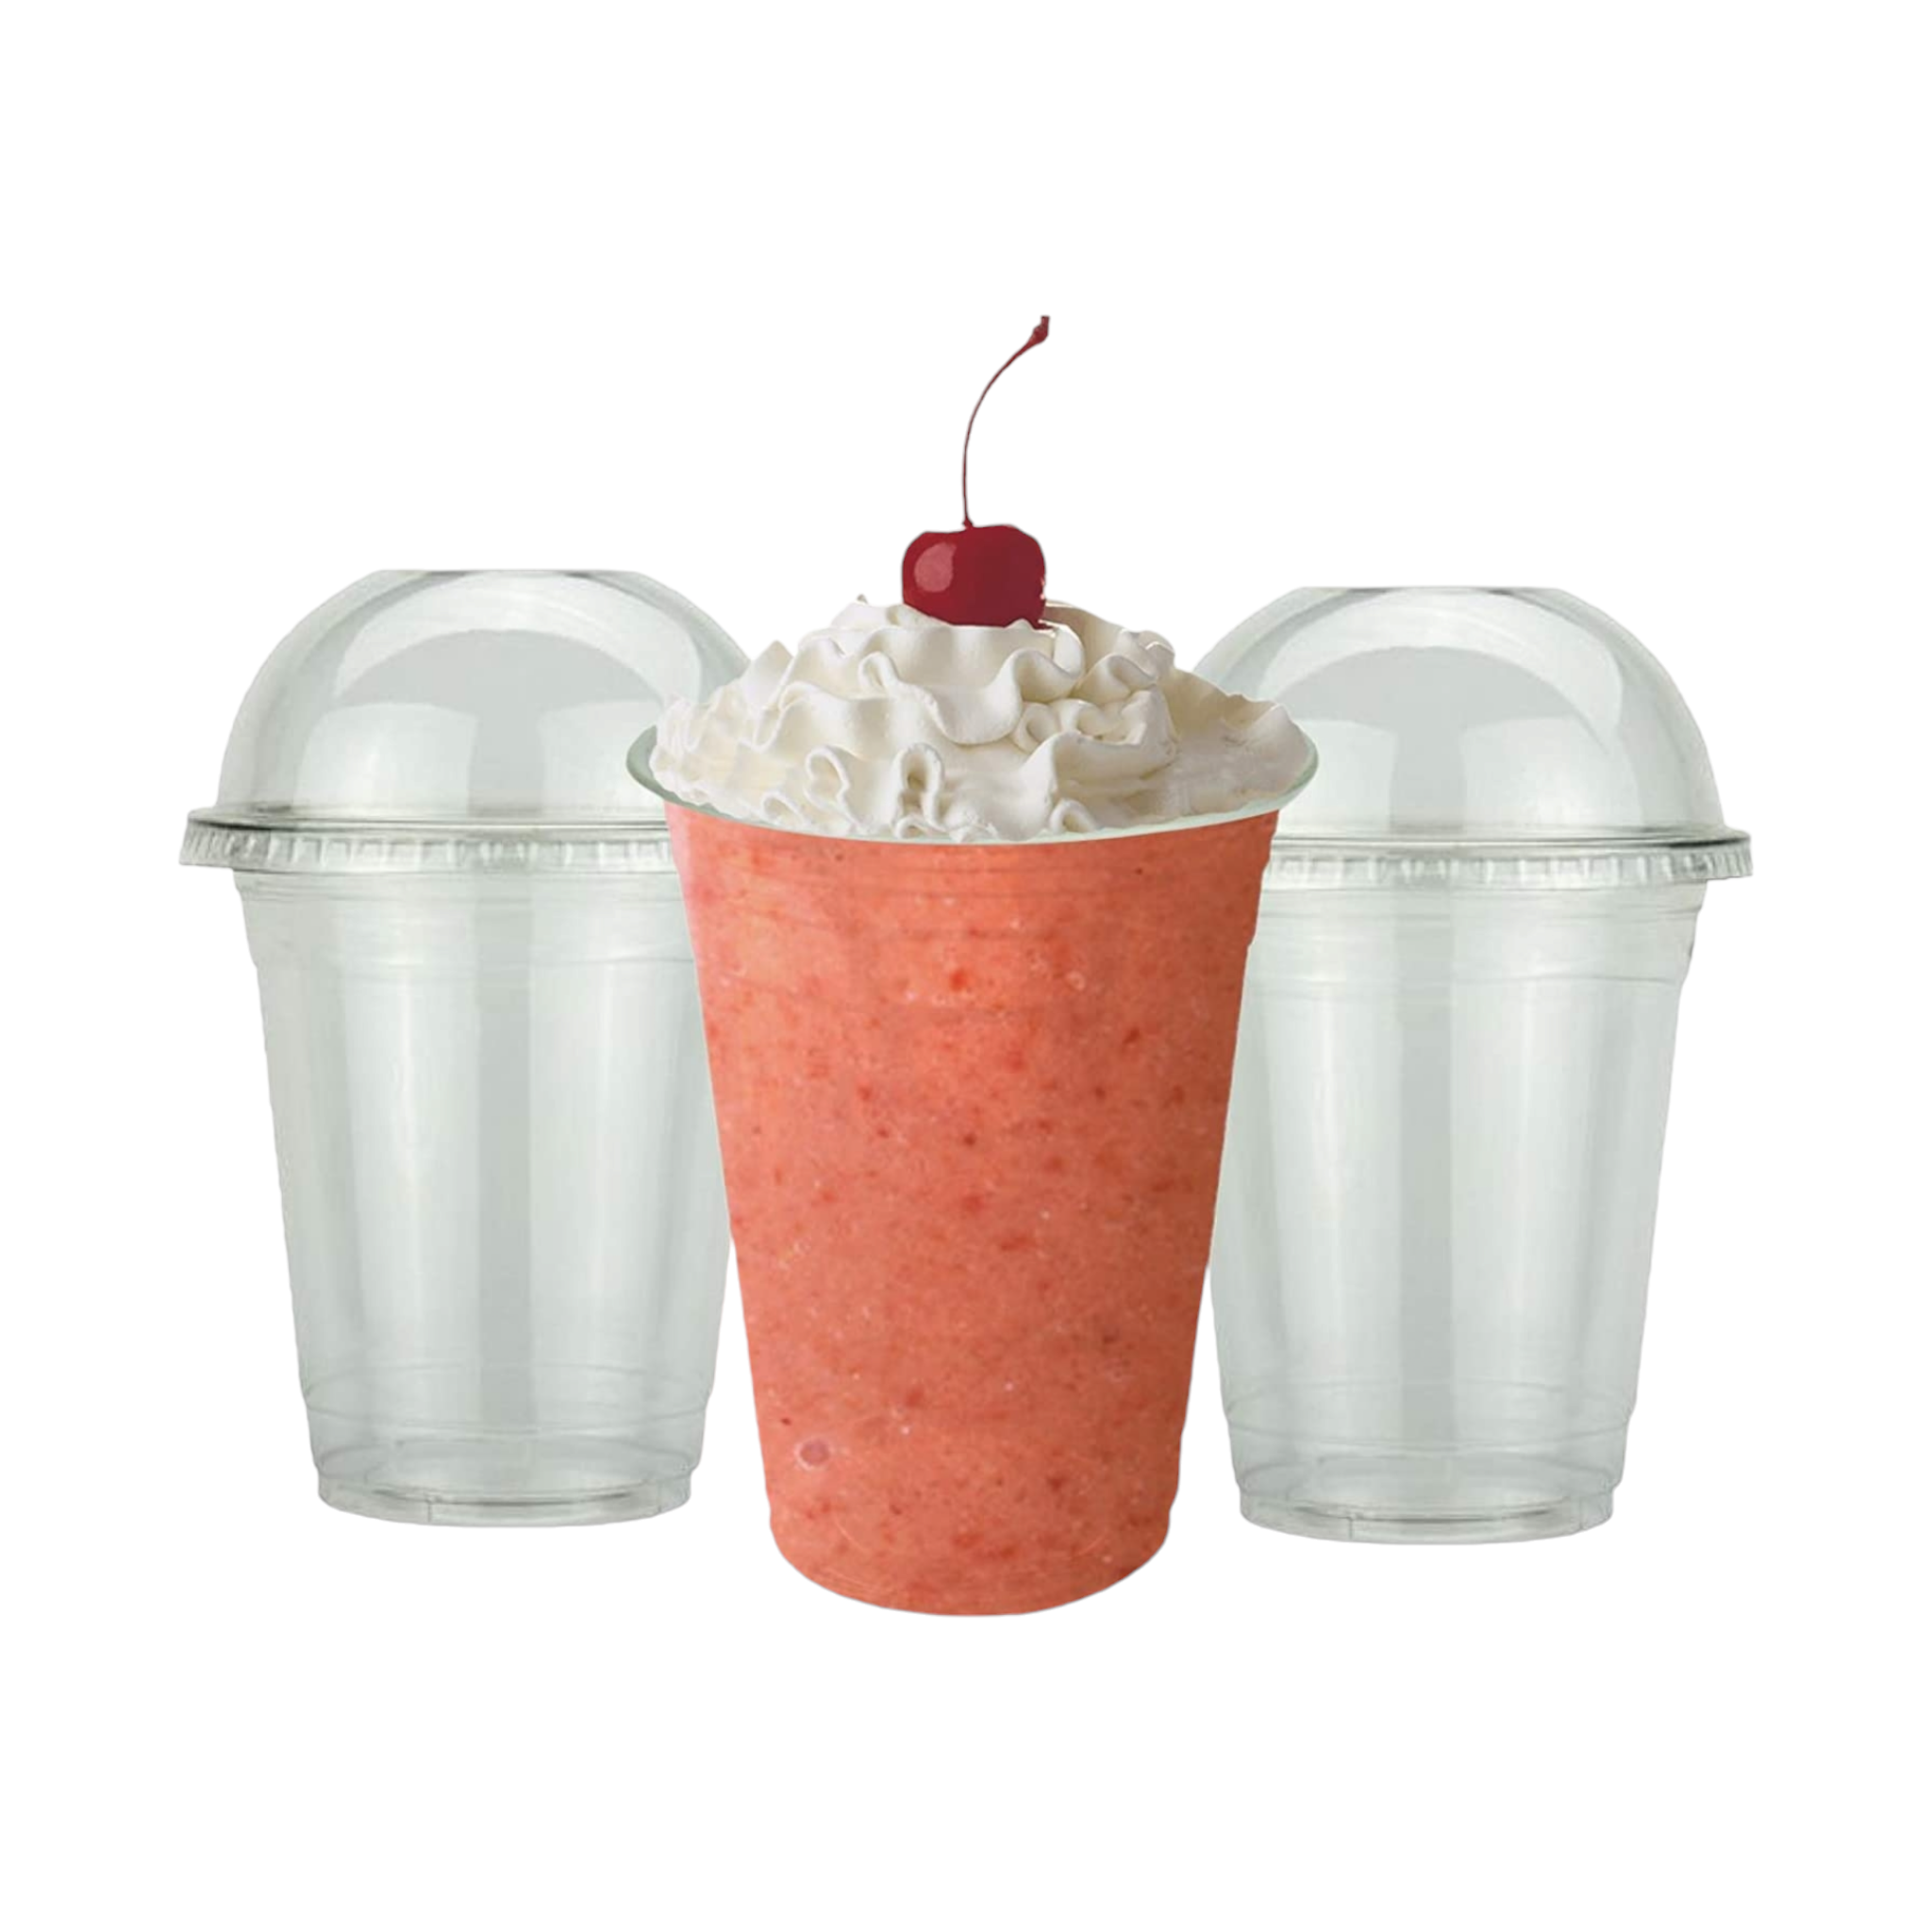 500ml Disposable Plastic Smoothie Cup with Dome Lid and Hole 10pack